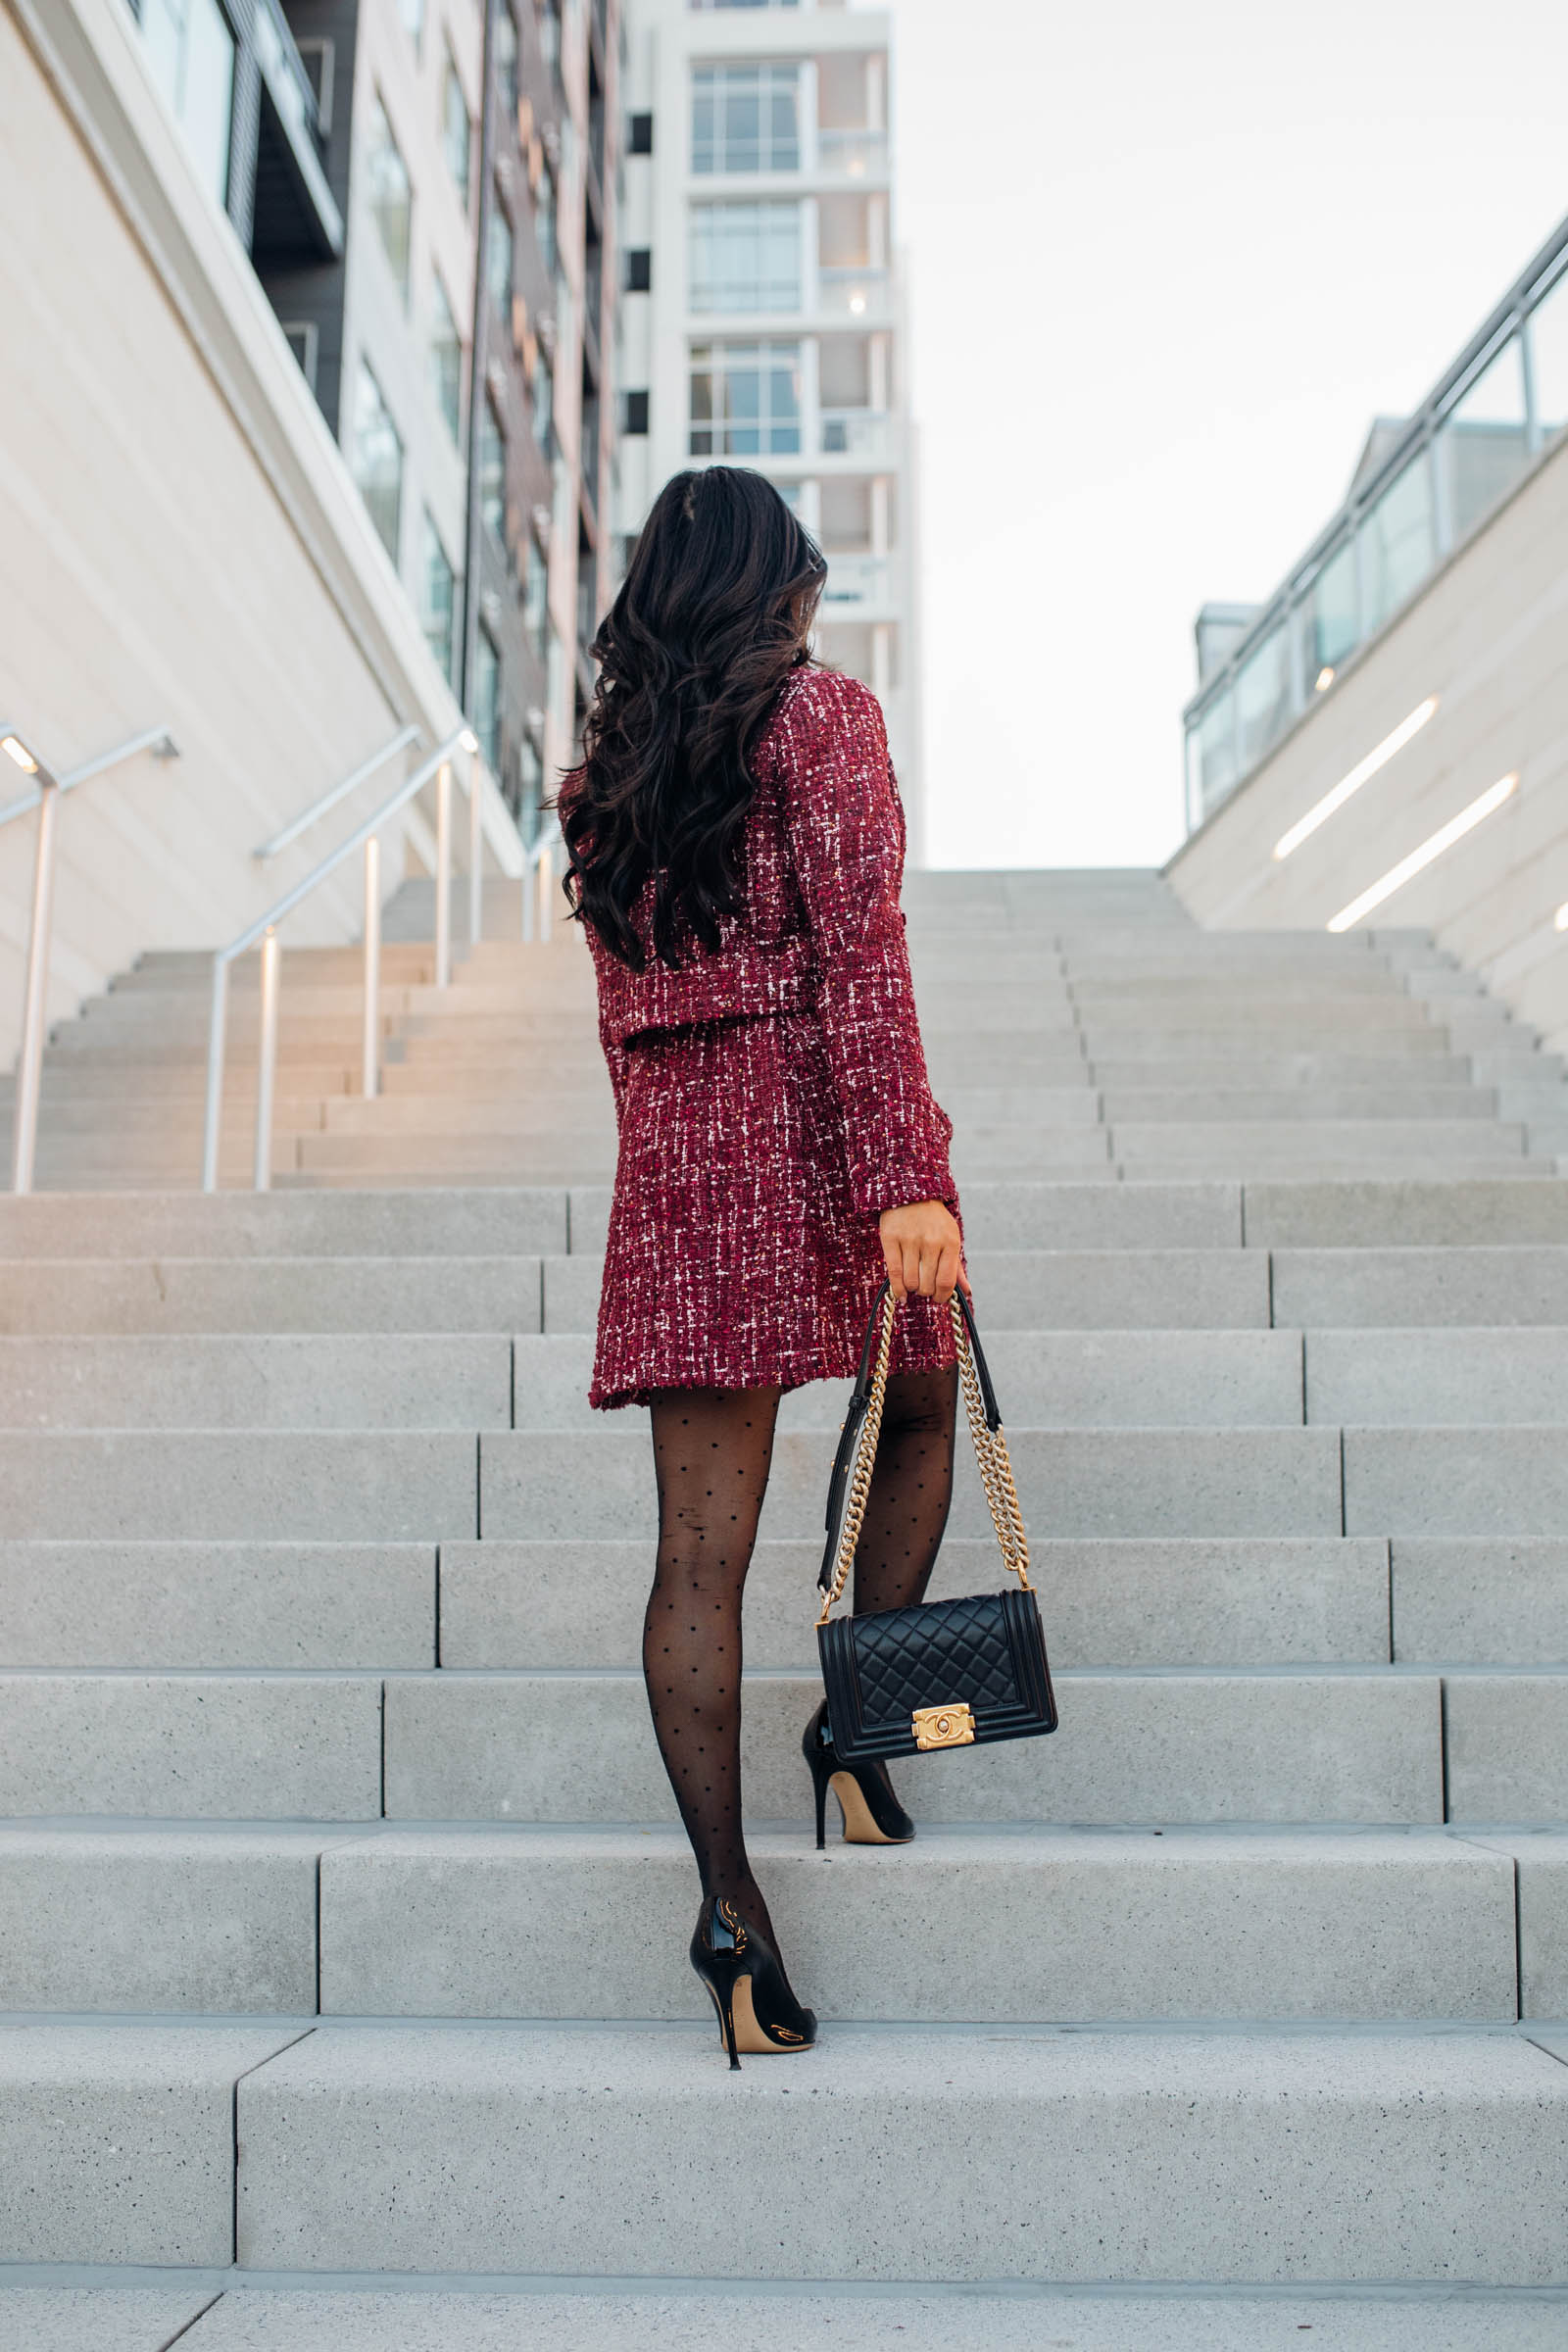 Blogger Hoang-Kim shares an office holiday party outfit idea wearing a matching tweed dress and jacket